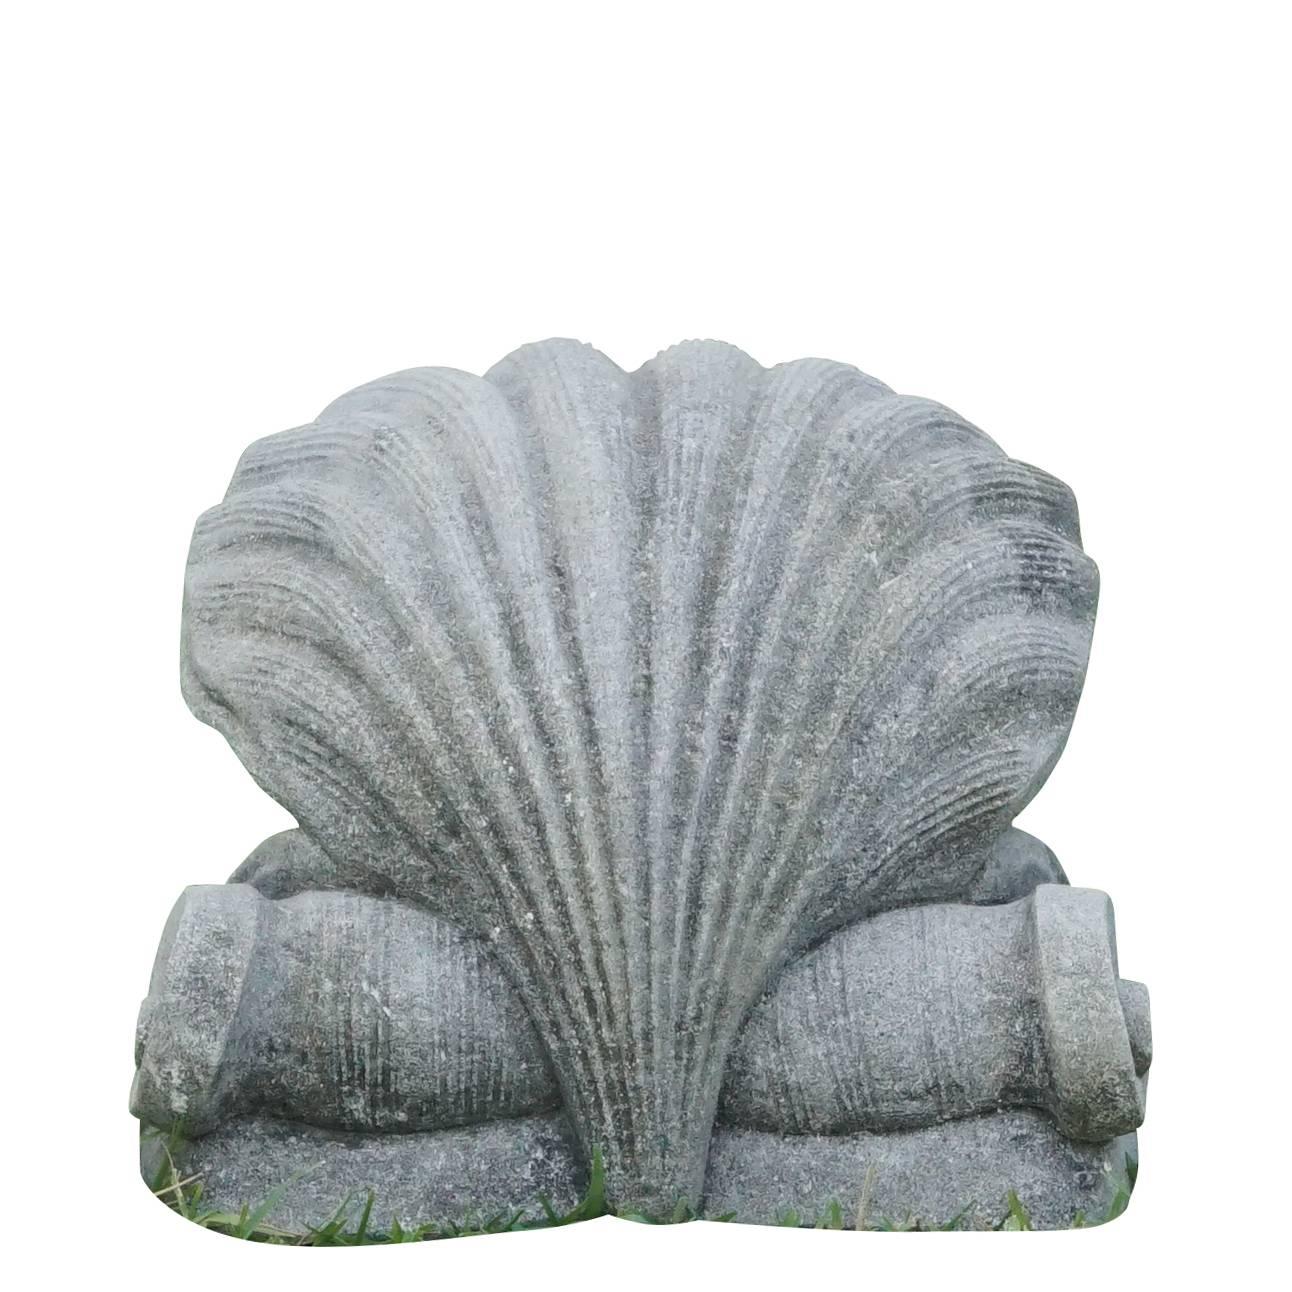 Over sized garden hand-carved fountain head in the shape of an oyster with a central pearl and heavy scrolls in the back. Could be used as a water feature or a garden ornament.